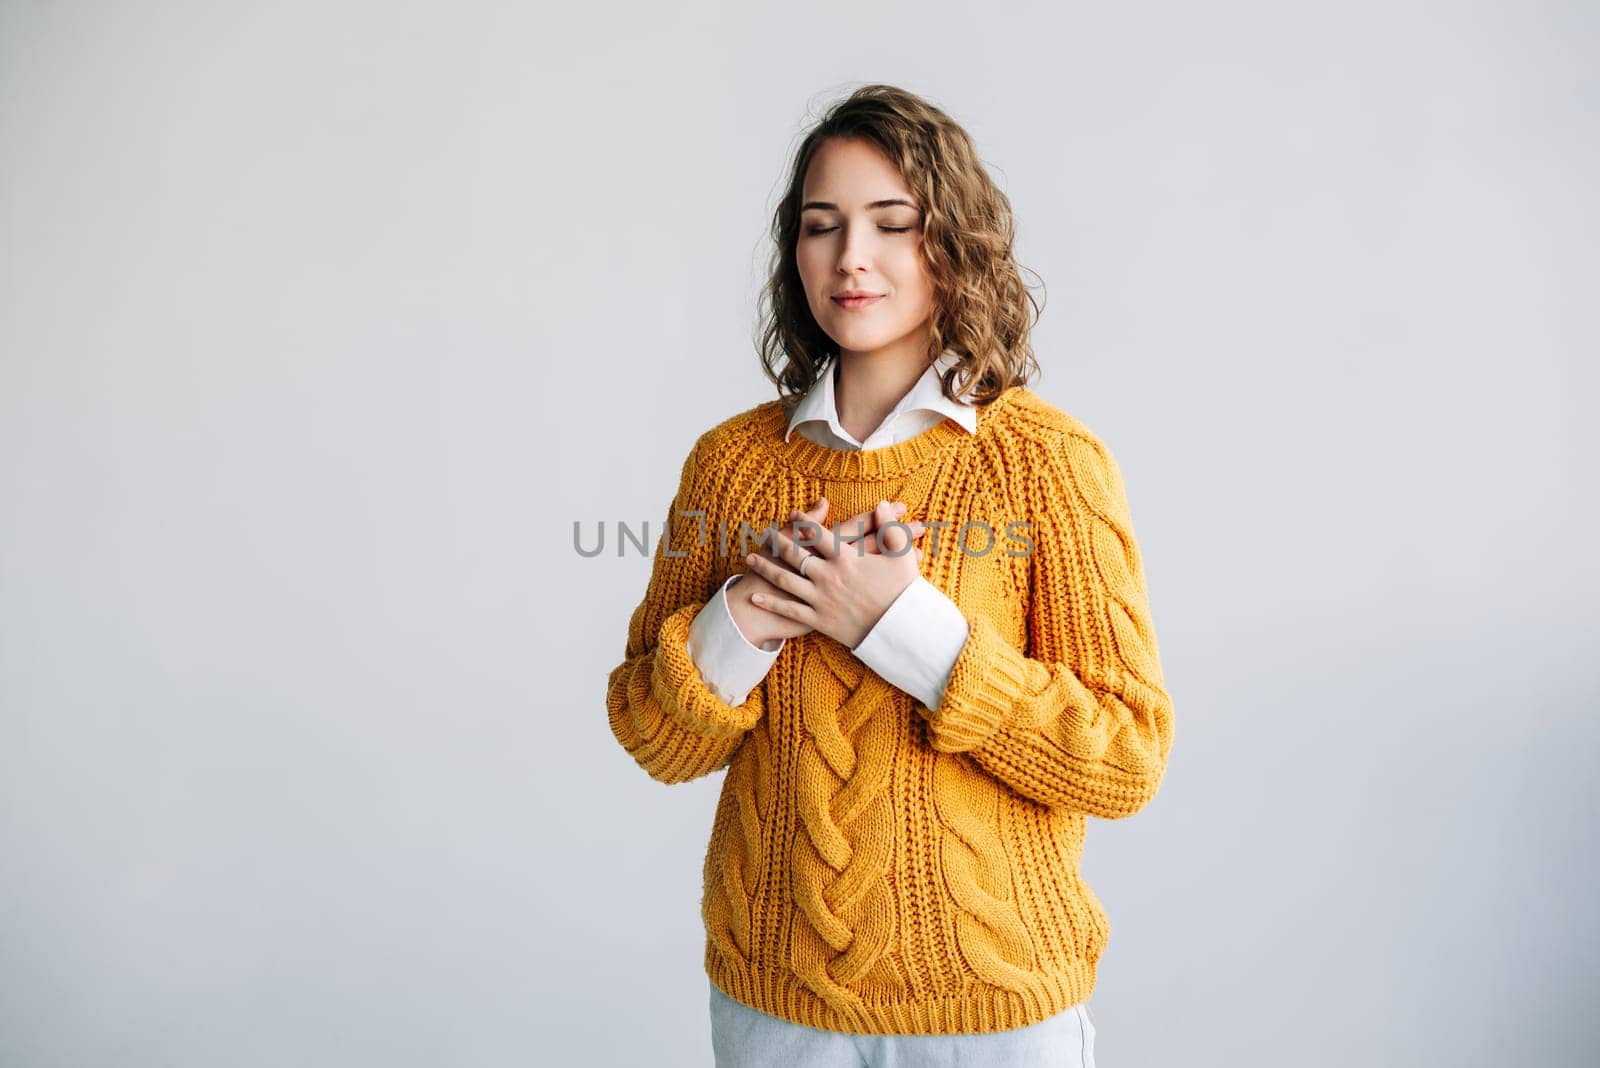 Grateful Woman: Hands on Chest, Expressing Happiness, Mental Balance - Thankfulness, Kindness, Love - Isolated Portrait on White Background - Conceptual Image of Gratitude and Emotional Well-being by ViShark